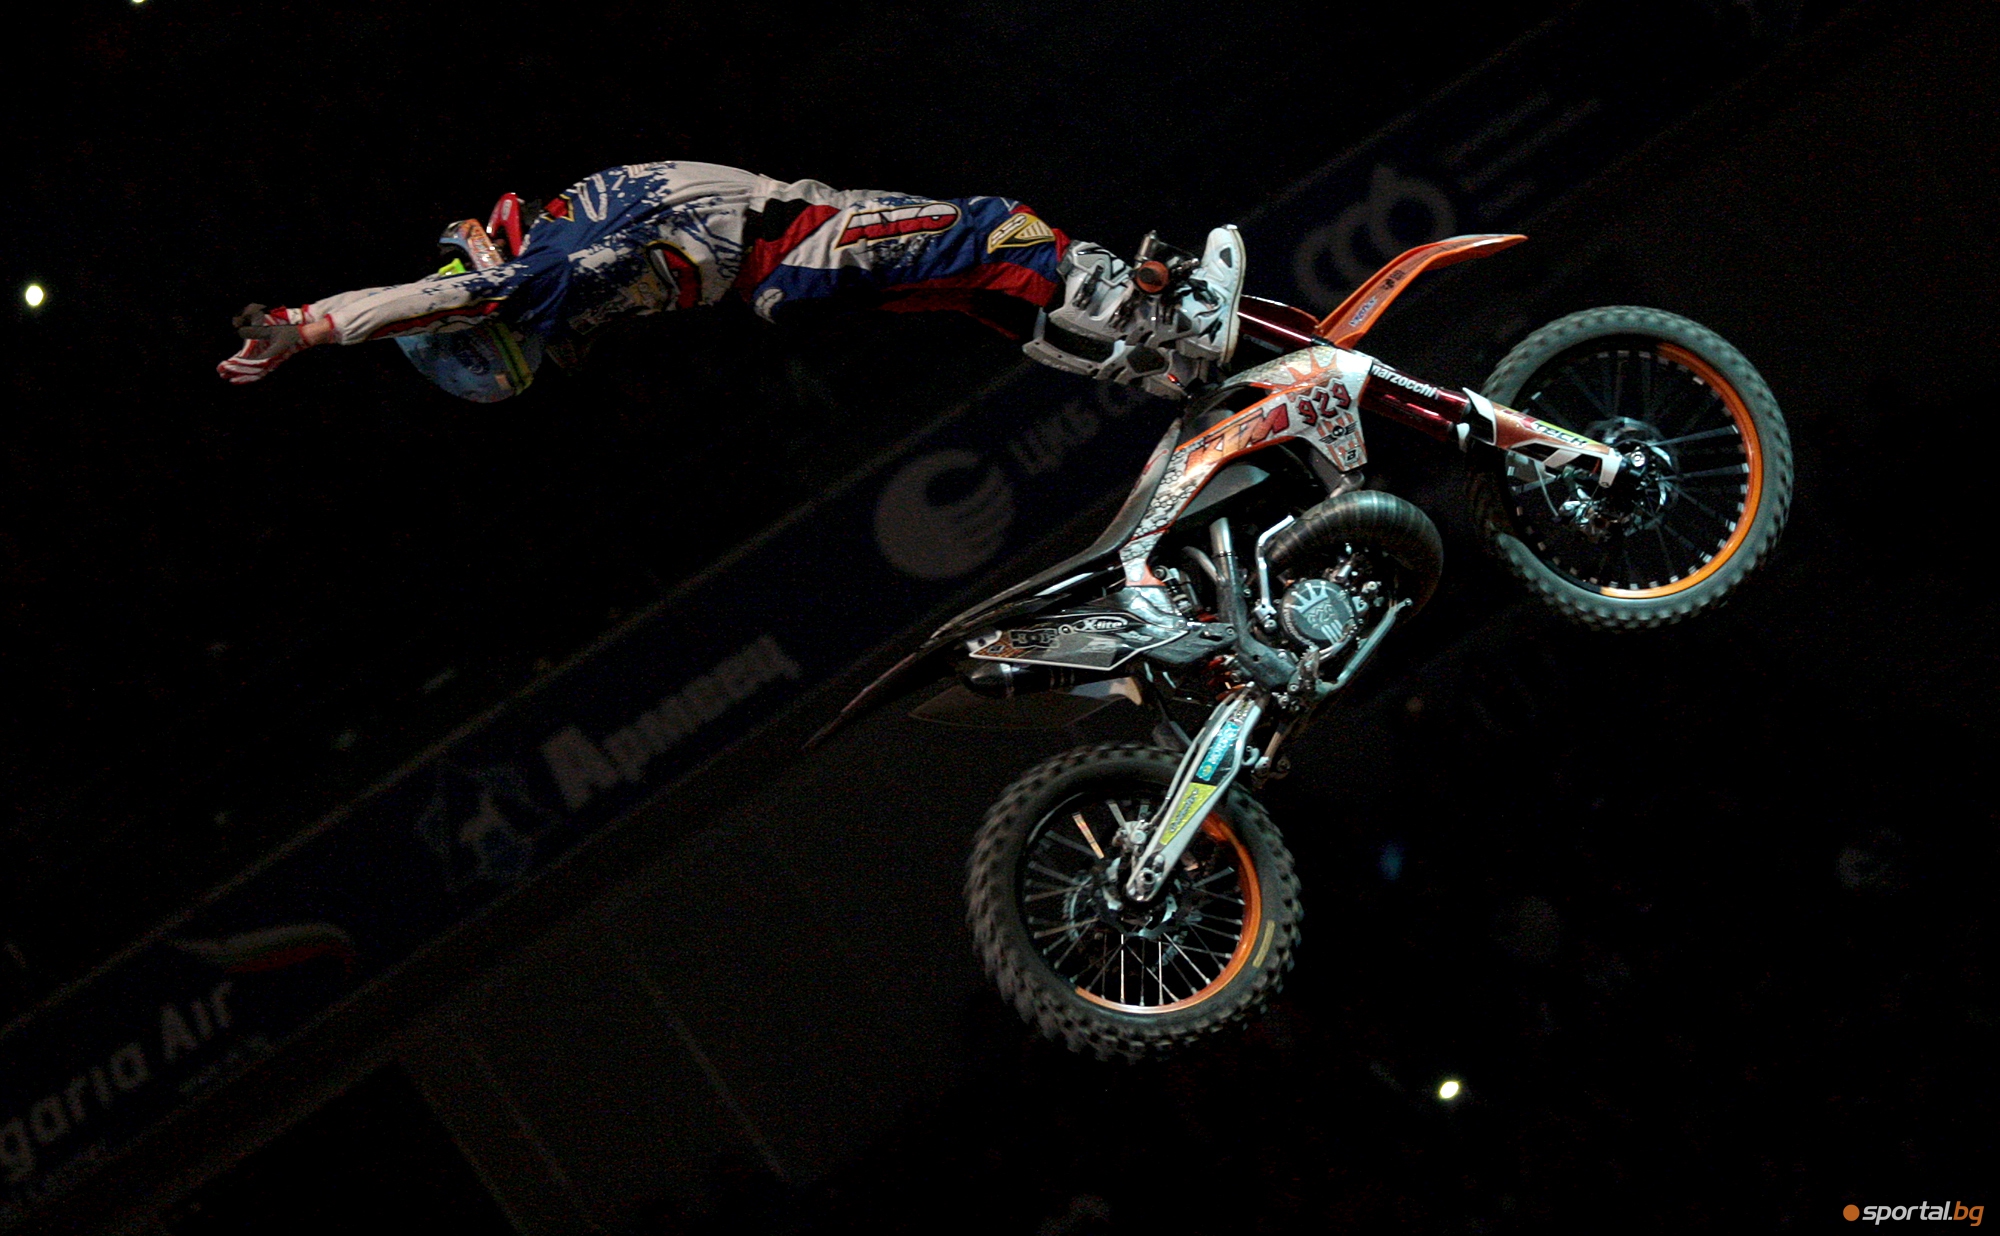   NIGHT OF THE JUMPS 2014       " "